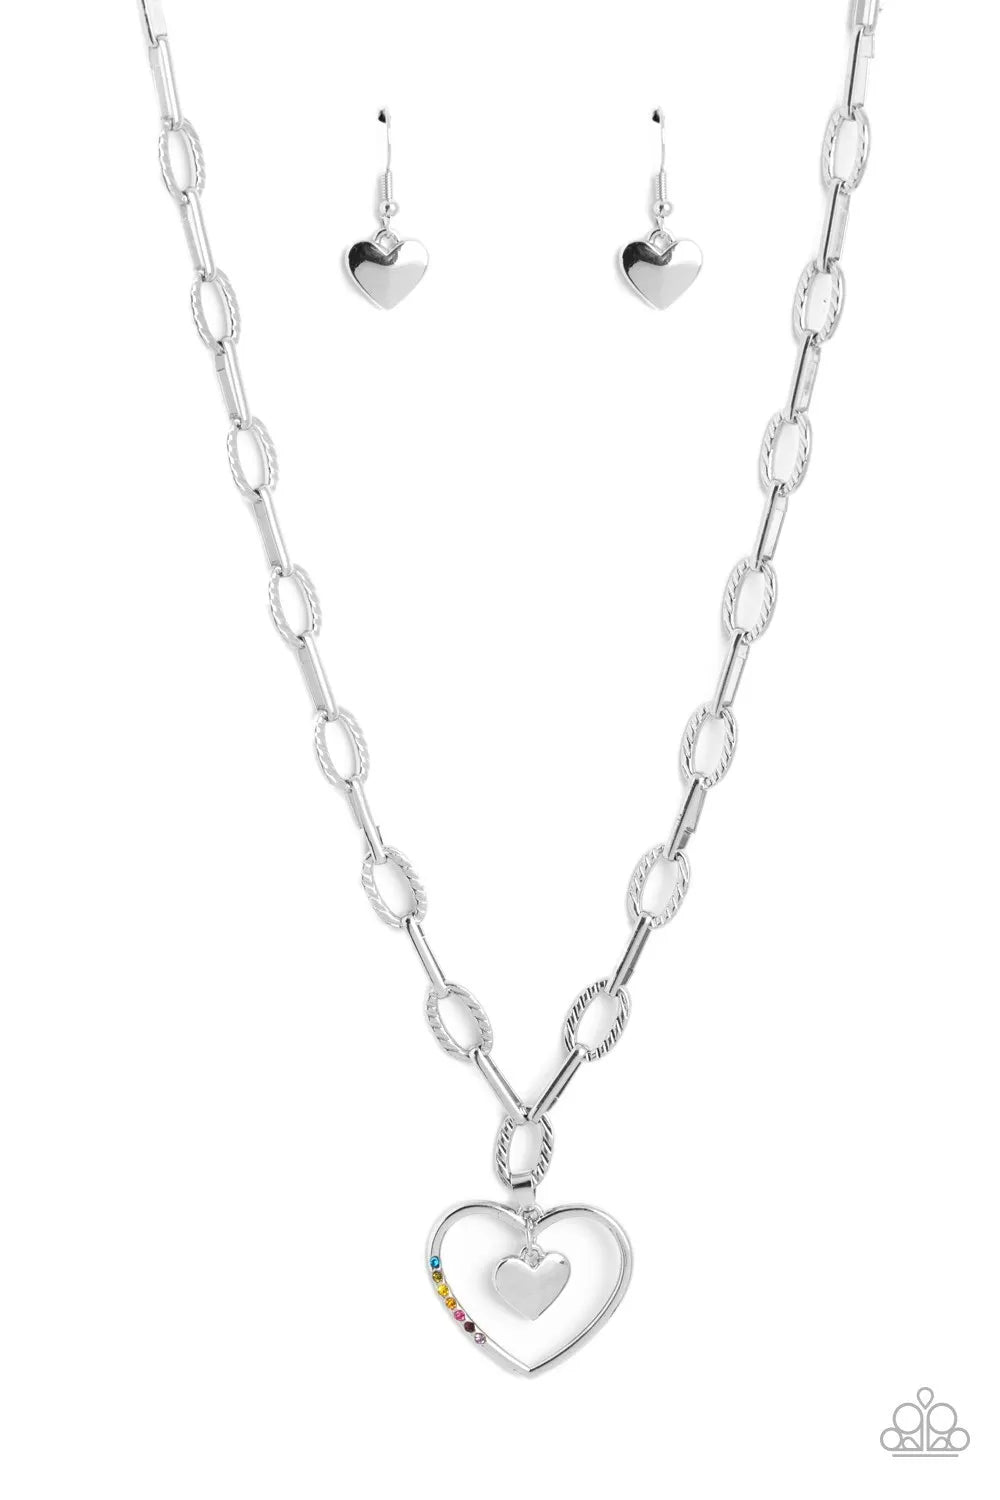 Refulgent Heart - Multi Color and Silver Necklace - Paparazzi Accessories - Textured ovals and elongated silver links lead the eye down to an oversized, airy, silver heart frame. Encrusted along one of the curves of the silver heart, dainty rhinestones glimmer for a subtle pop of color. Dangling inside the oversized heart frame, a silver heart pendant swings for a romantic finish.